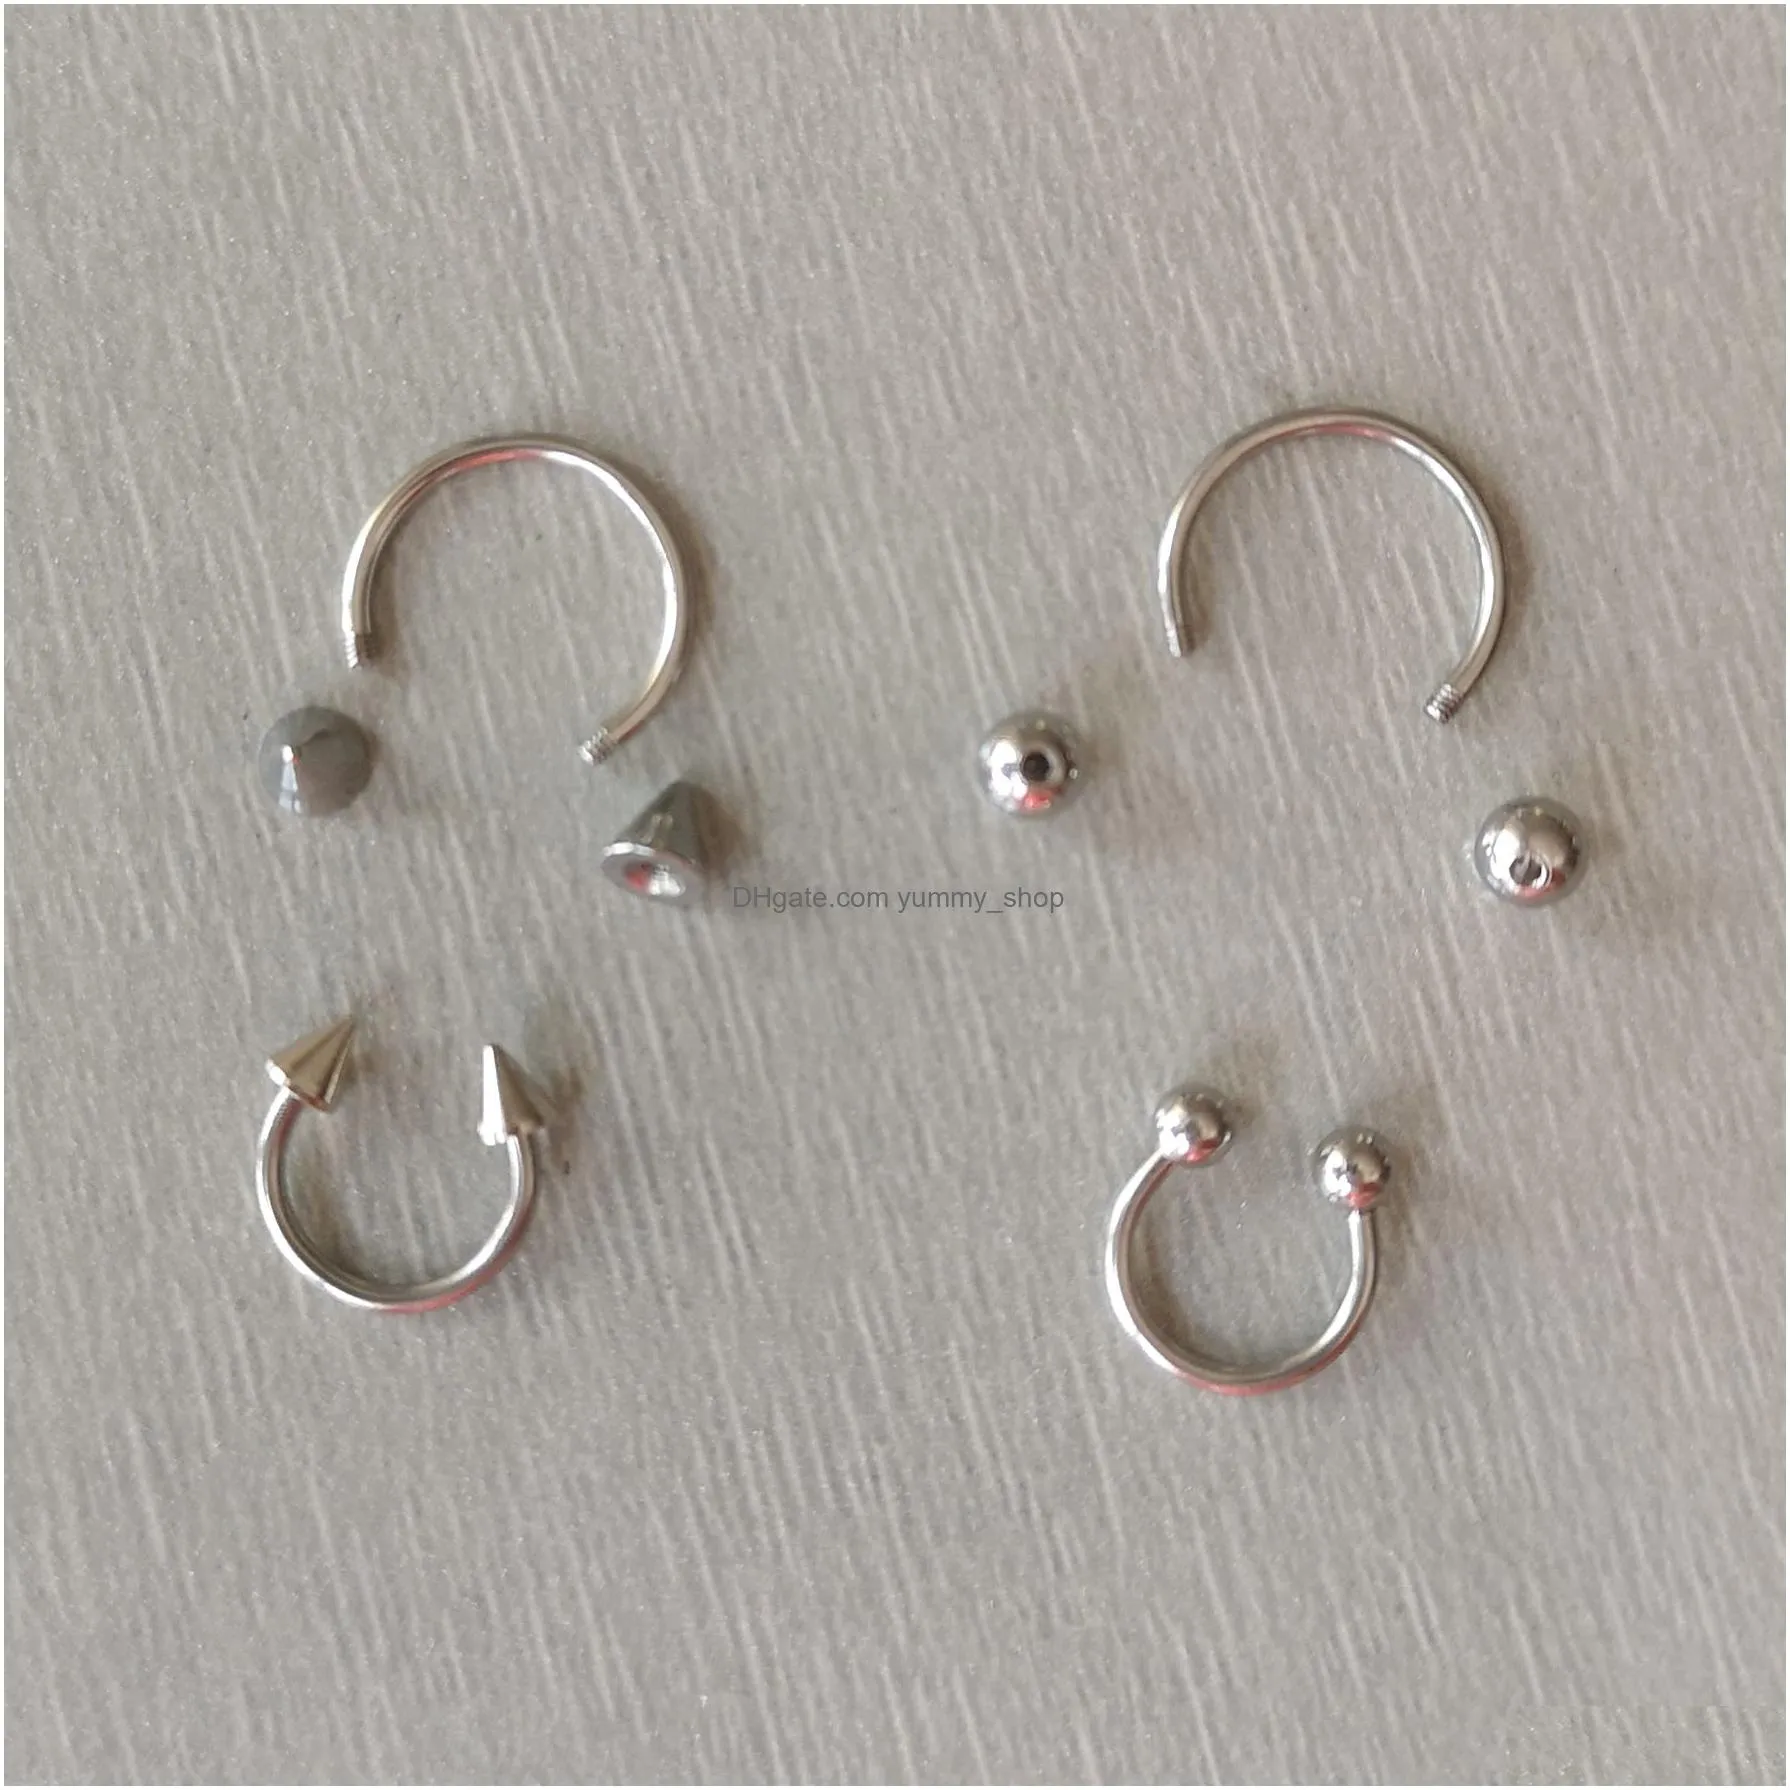 316l stainless steel navel tongue lip nails nose screws nipple ear eyebrow rings studs multipurpose body piercing jewelry mixed